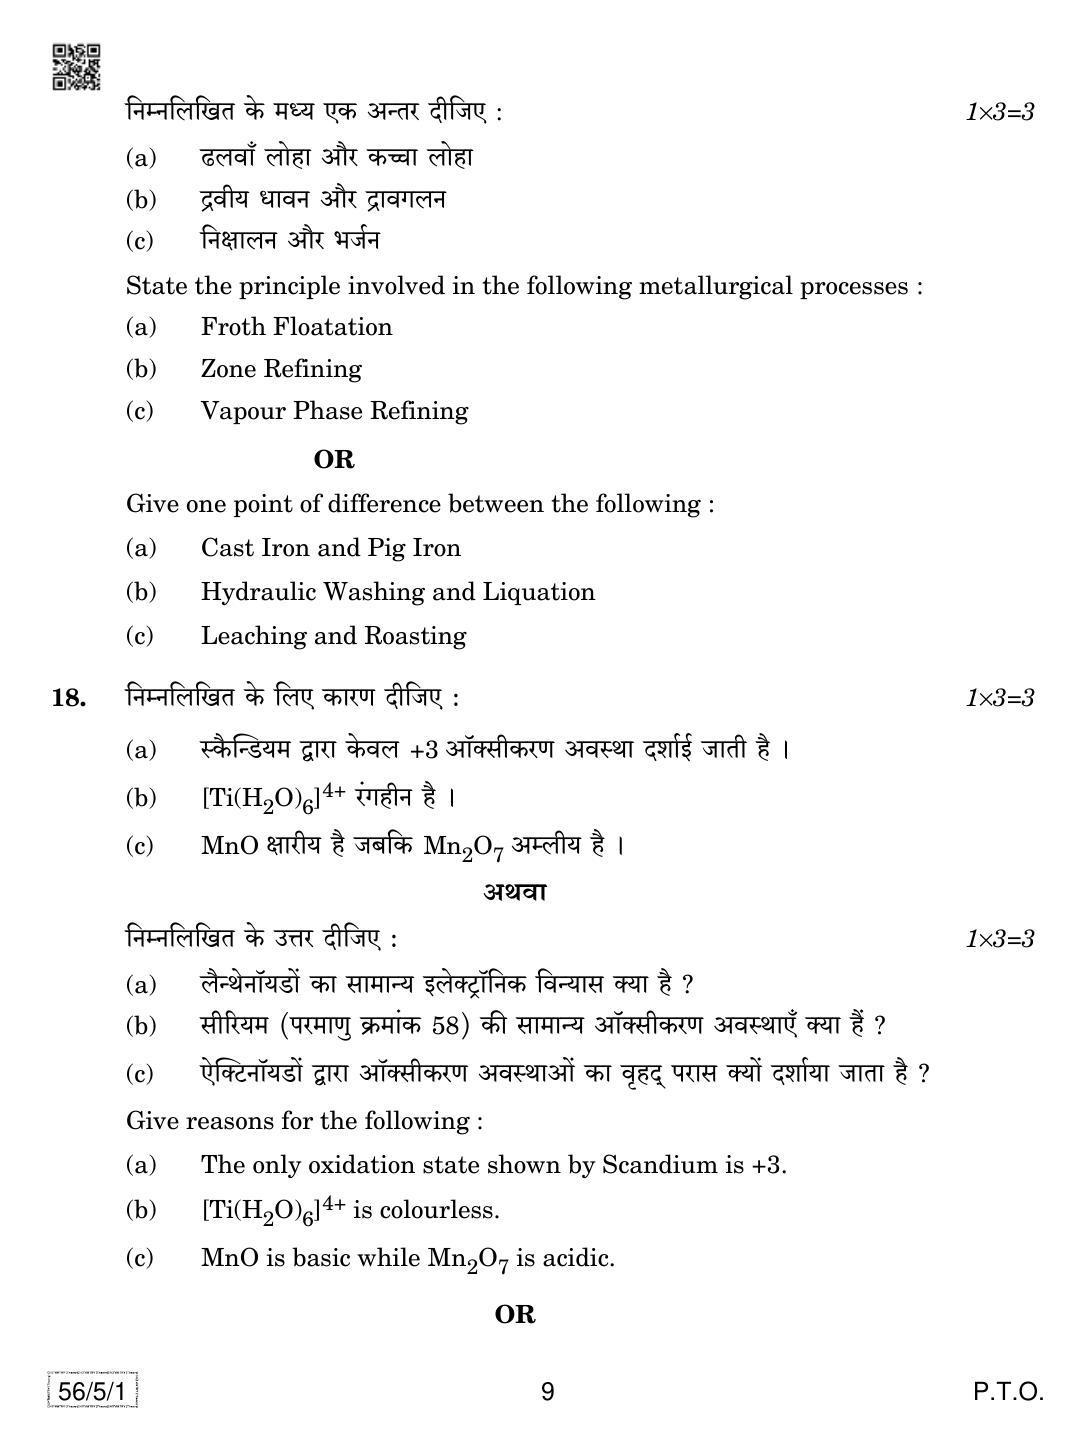 CBSE Class 12 56-5-1 Chemistry 2019 Question Paper - Page 9